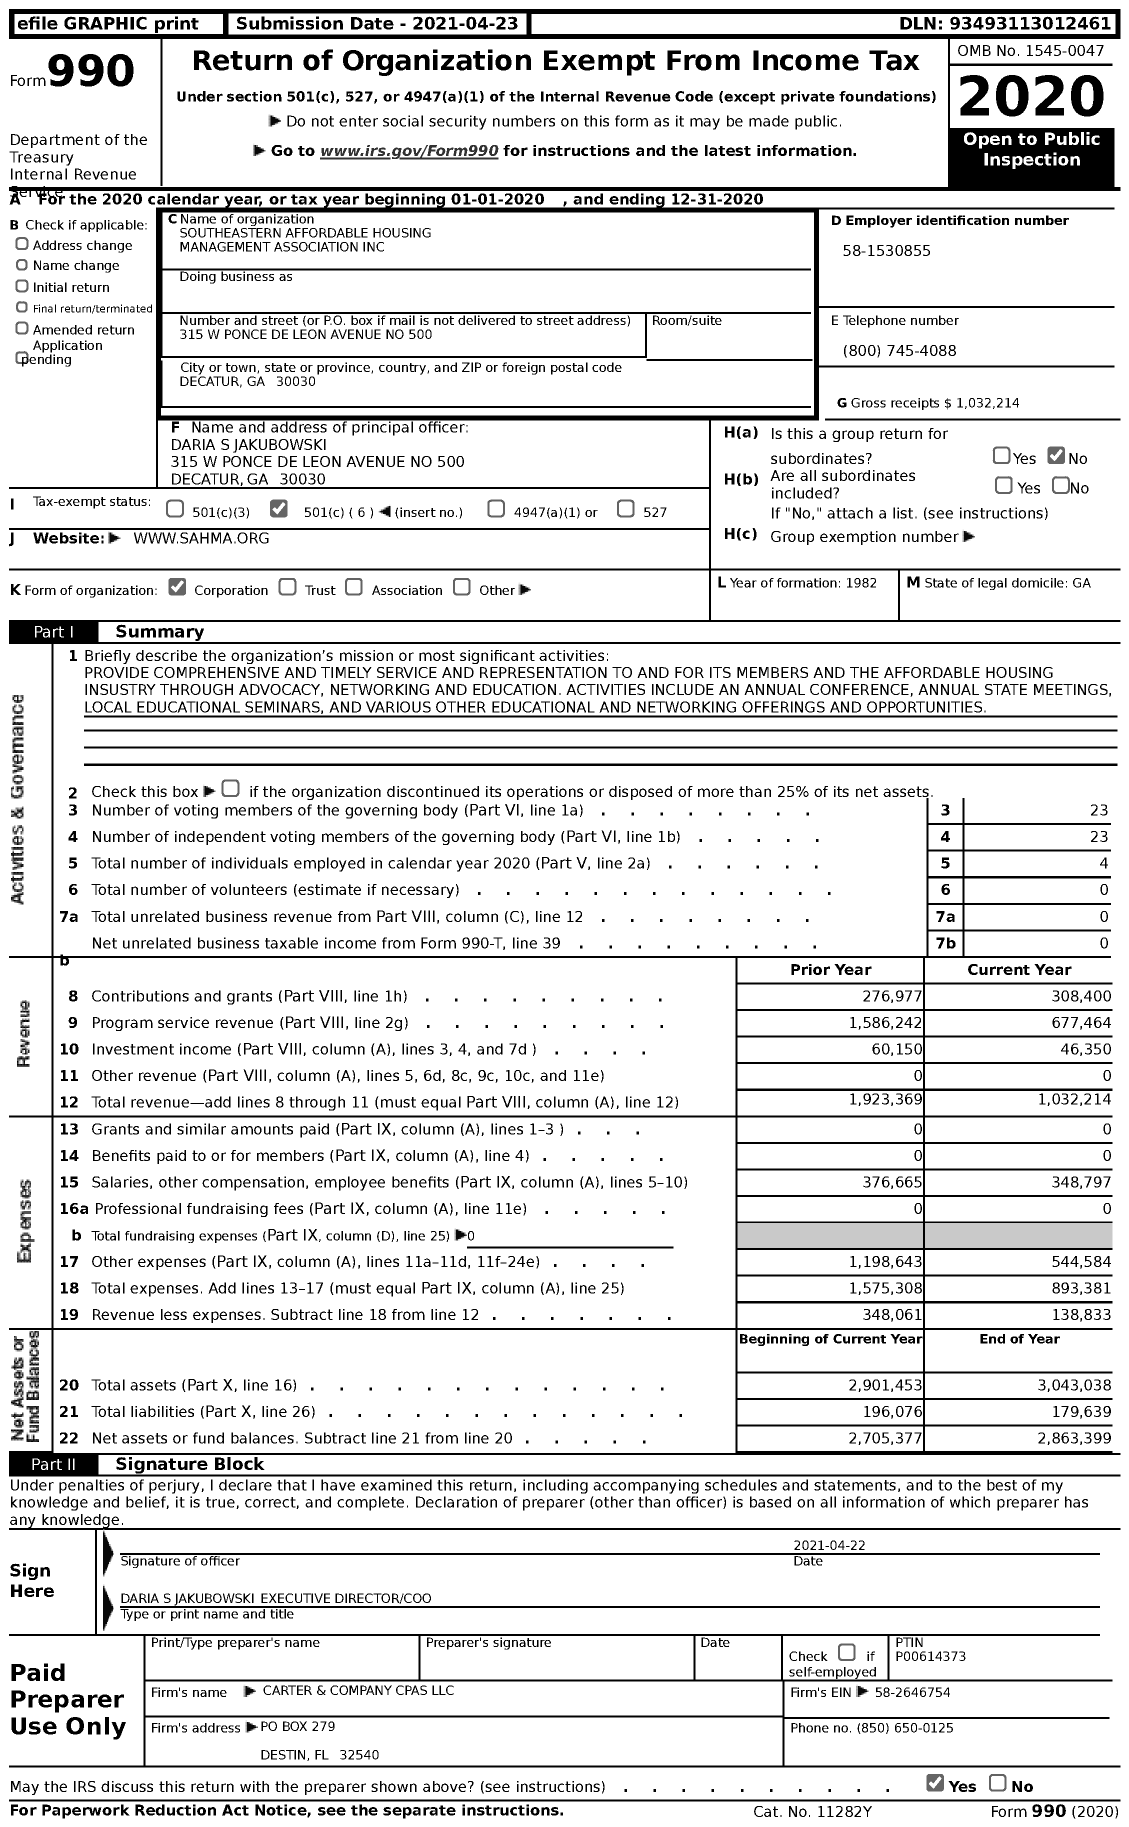 Image of first page of 2020 Form 990 for Southeastern Affordable Housing Management Association (SAHMA)